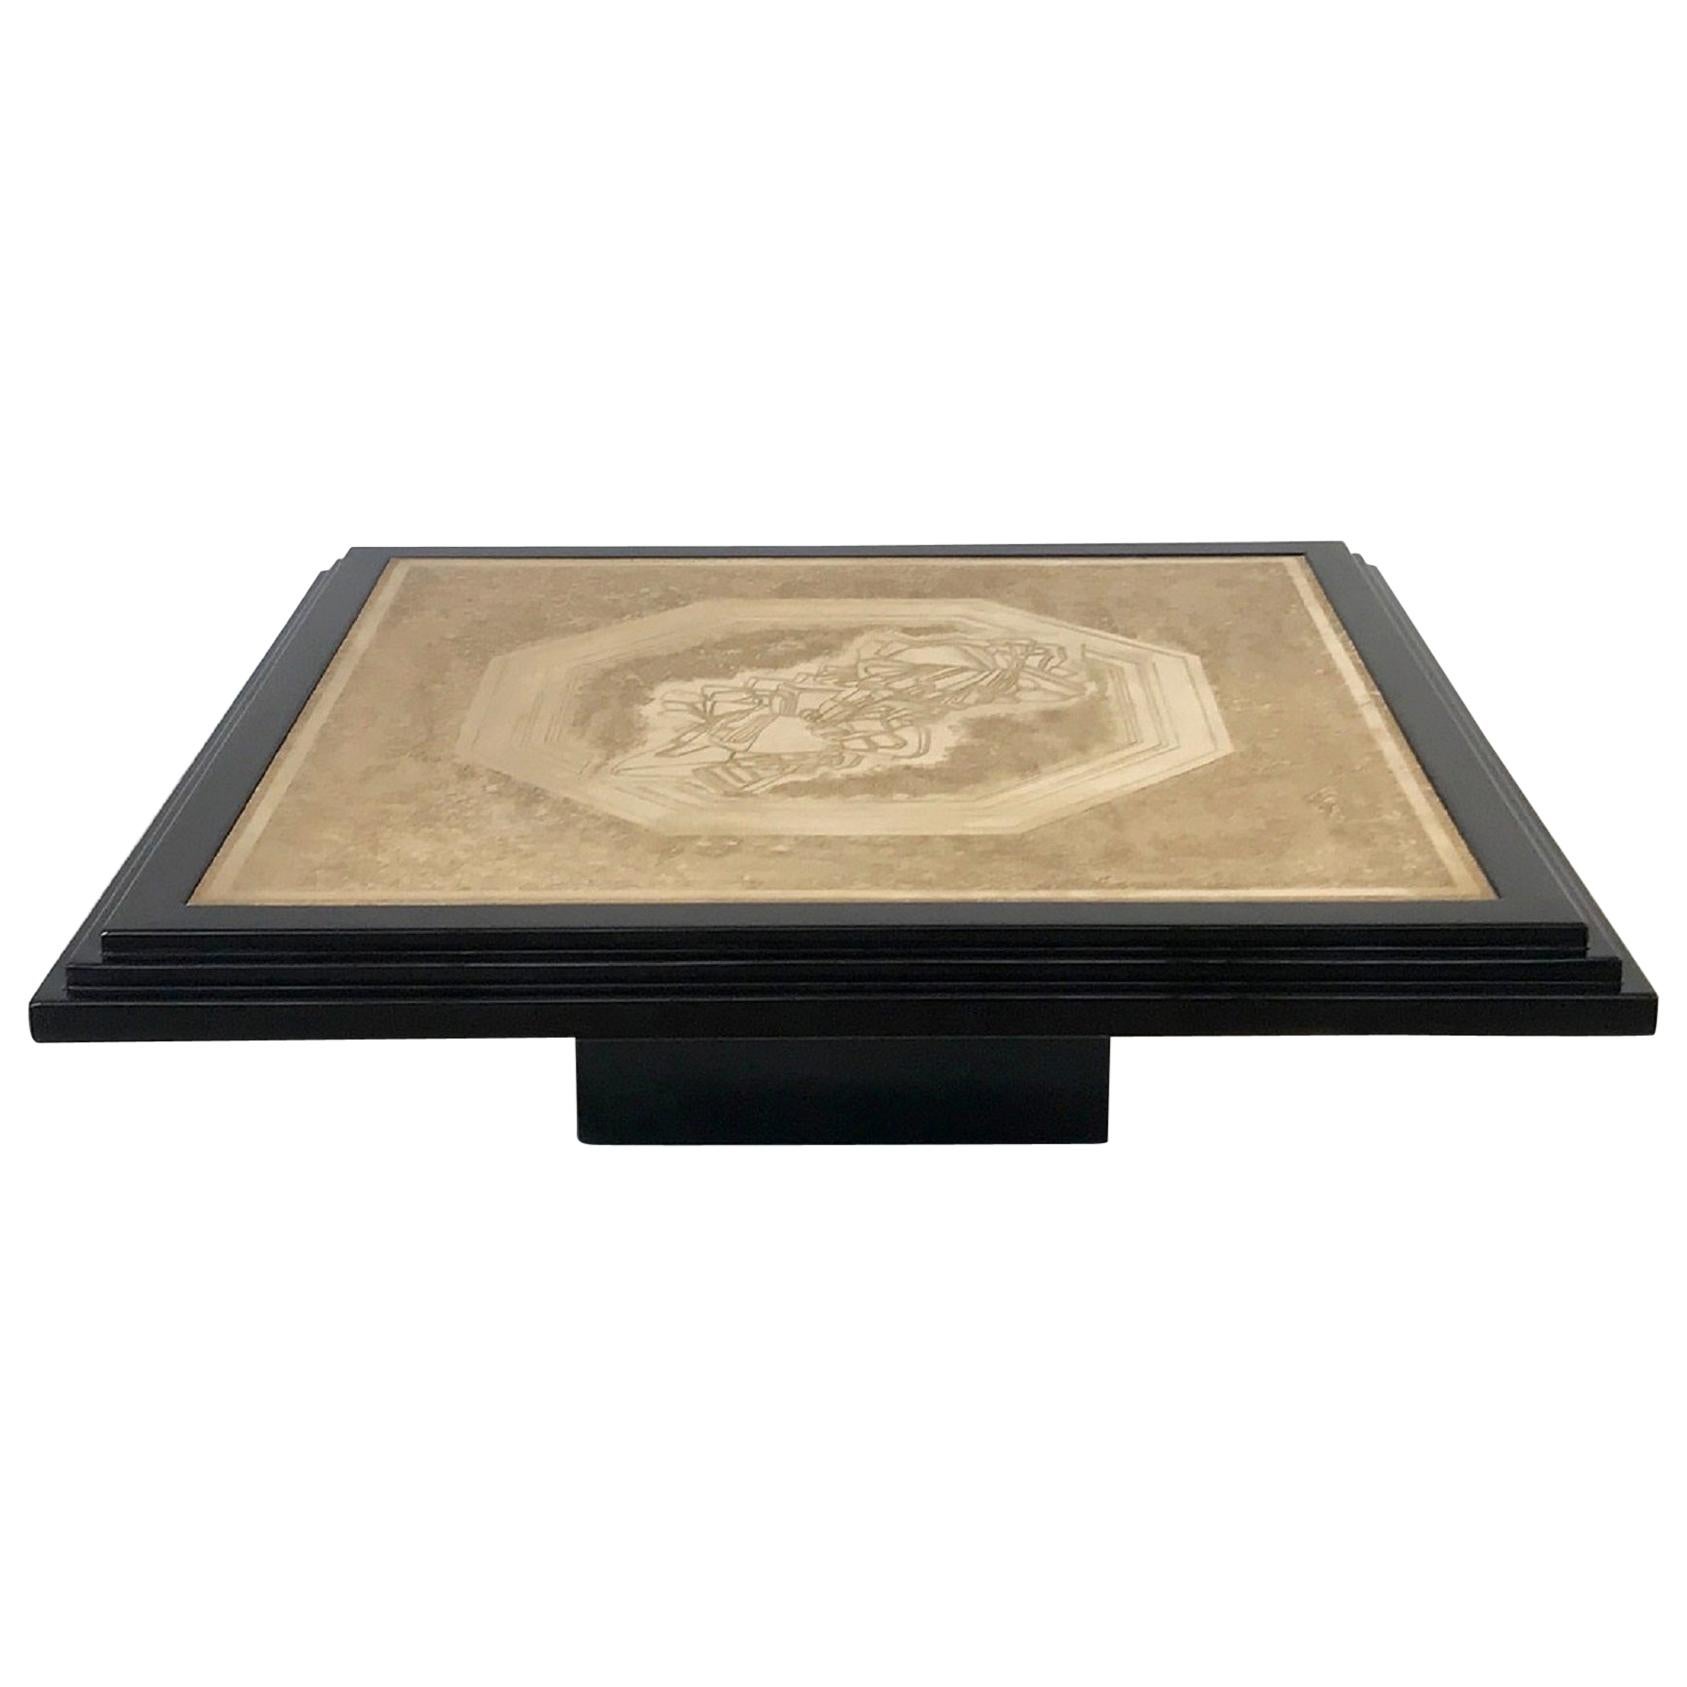 Georges Mathias Coffee Table in Black Lacquered and Etched Brass, Unique Piece